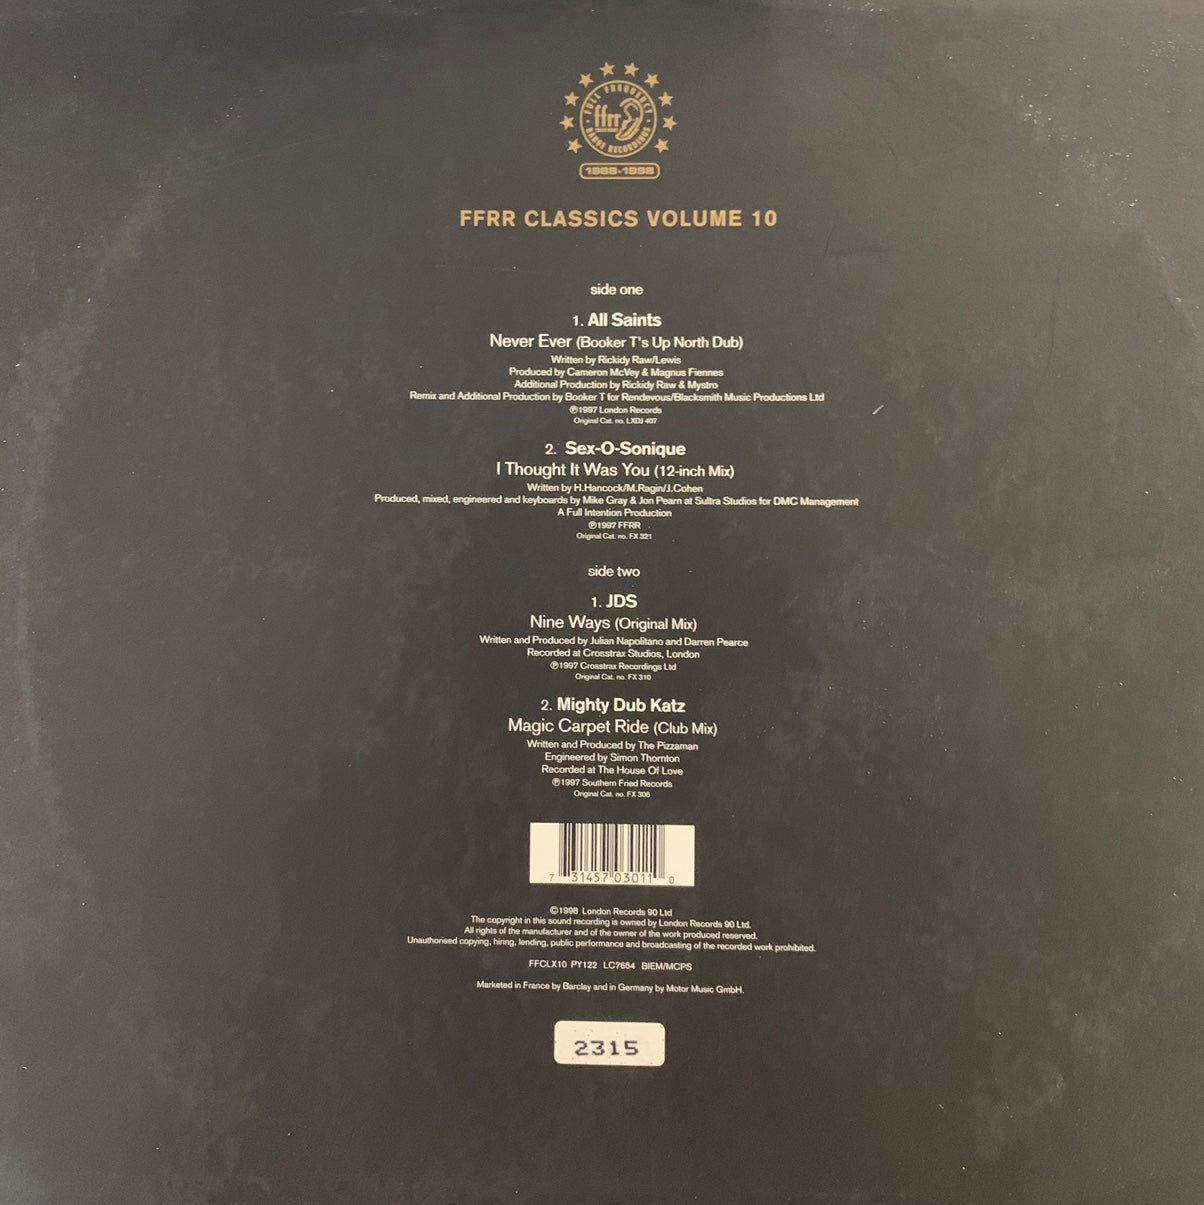 FFRR Classics Volume 10 4 Track 12inch Vinyl Single Feat All Saints, Sex-O-Sonique, Mighty Dub Katz and JDS